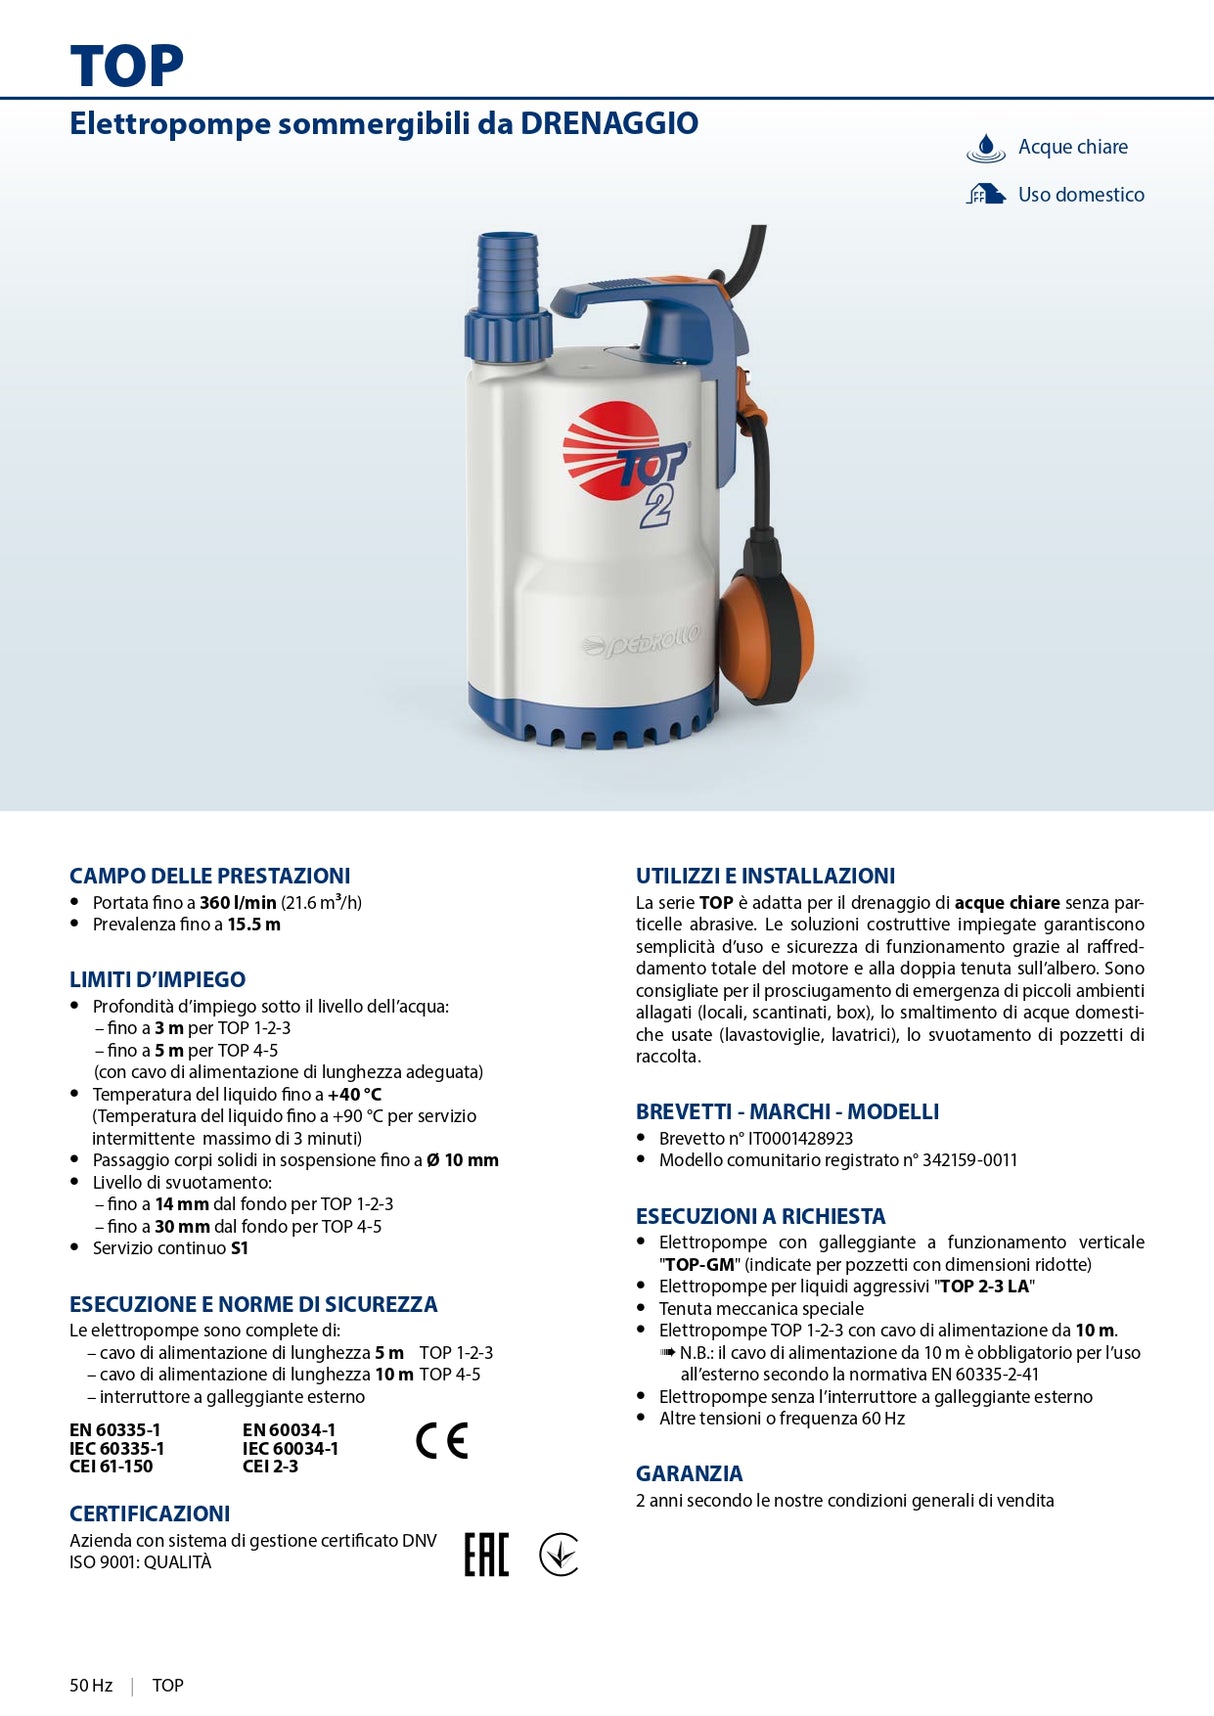 TOP 1 Pedrollo submersible electric drainage pump